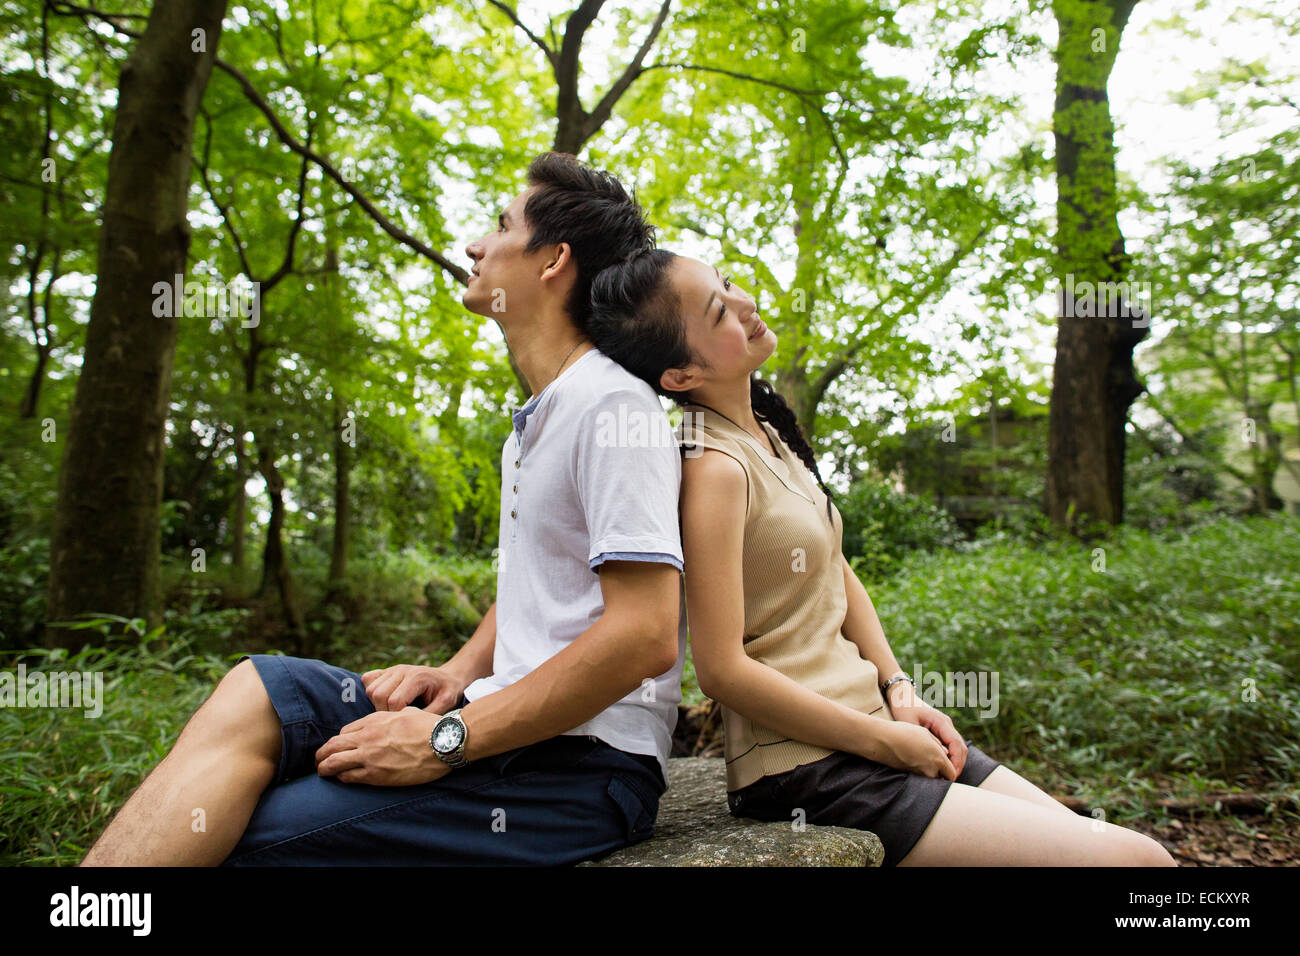 A couple at an outdoor party in a forest. Stock Photo